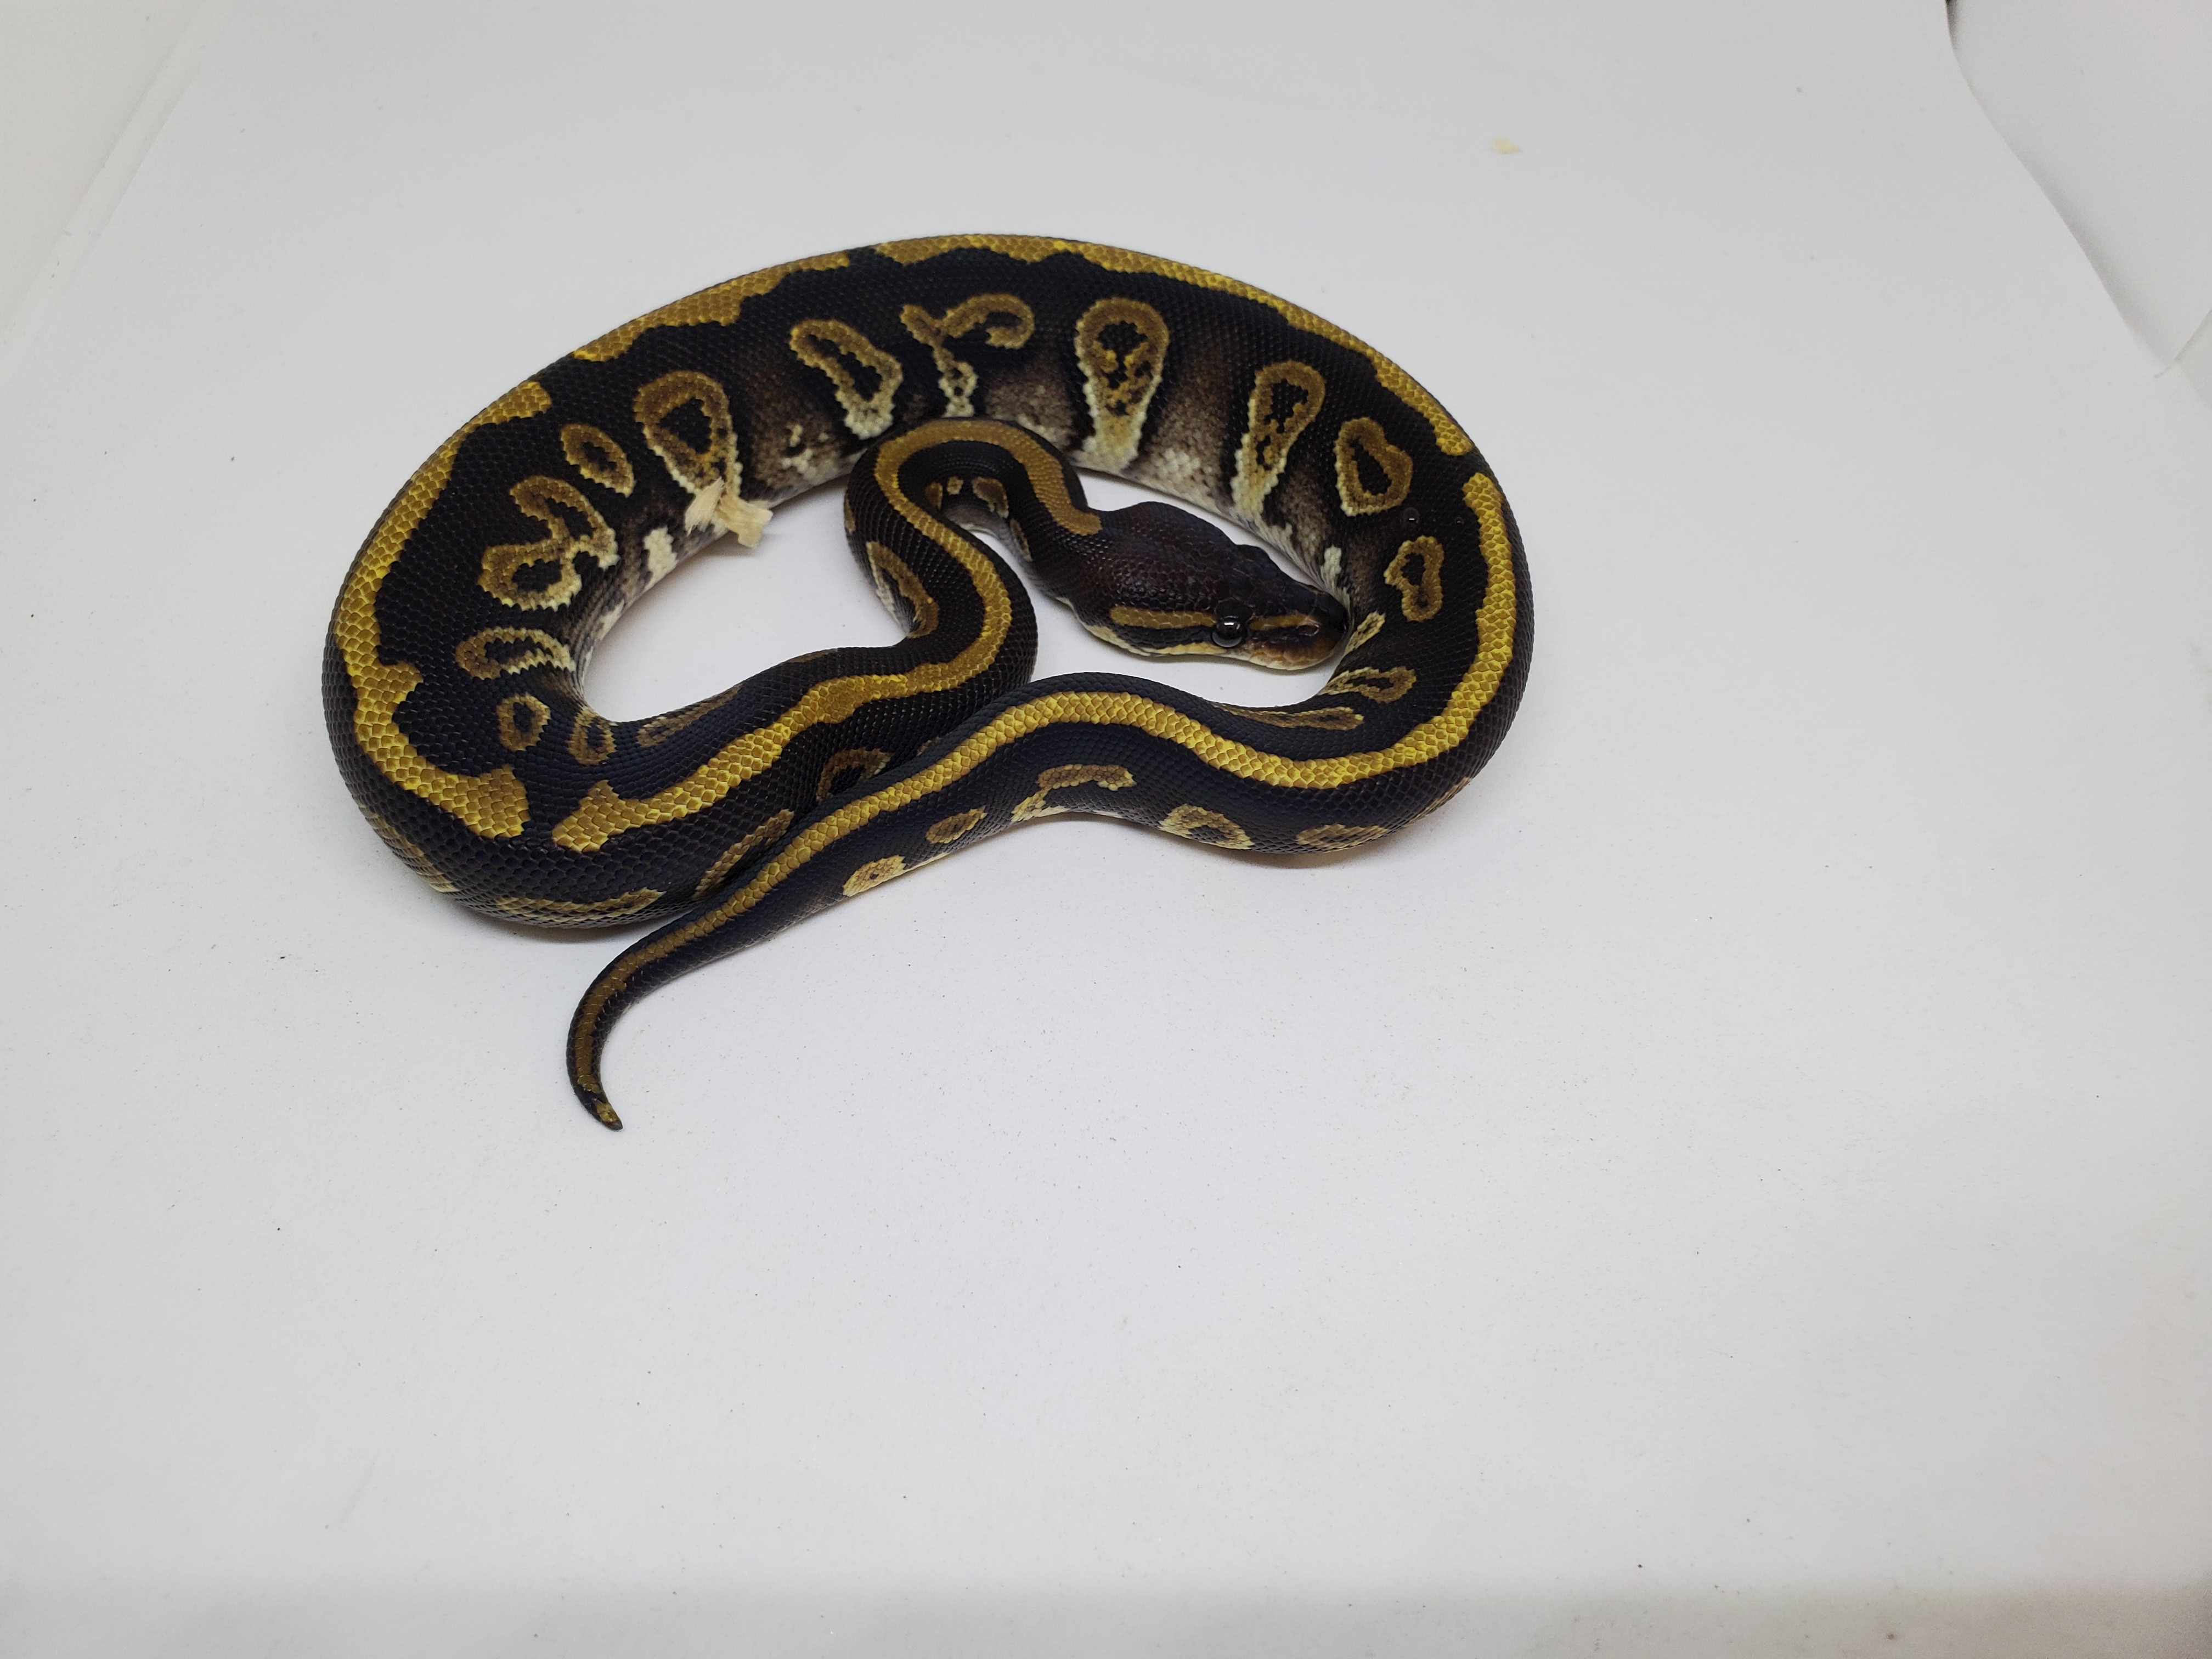 Black Lace Ball Python by Reptile Collective